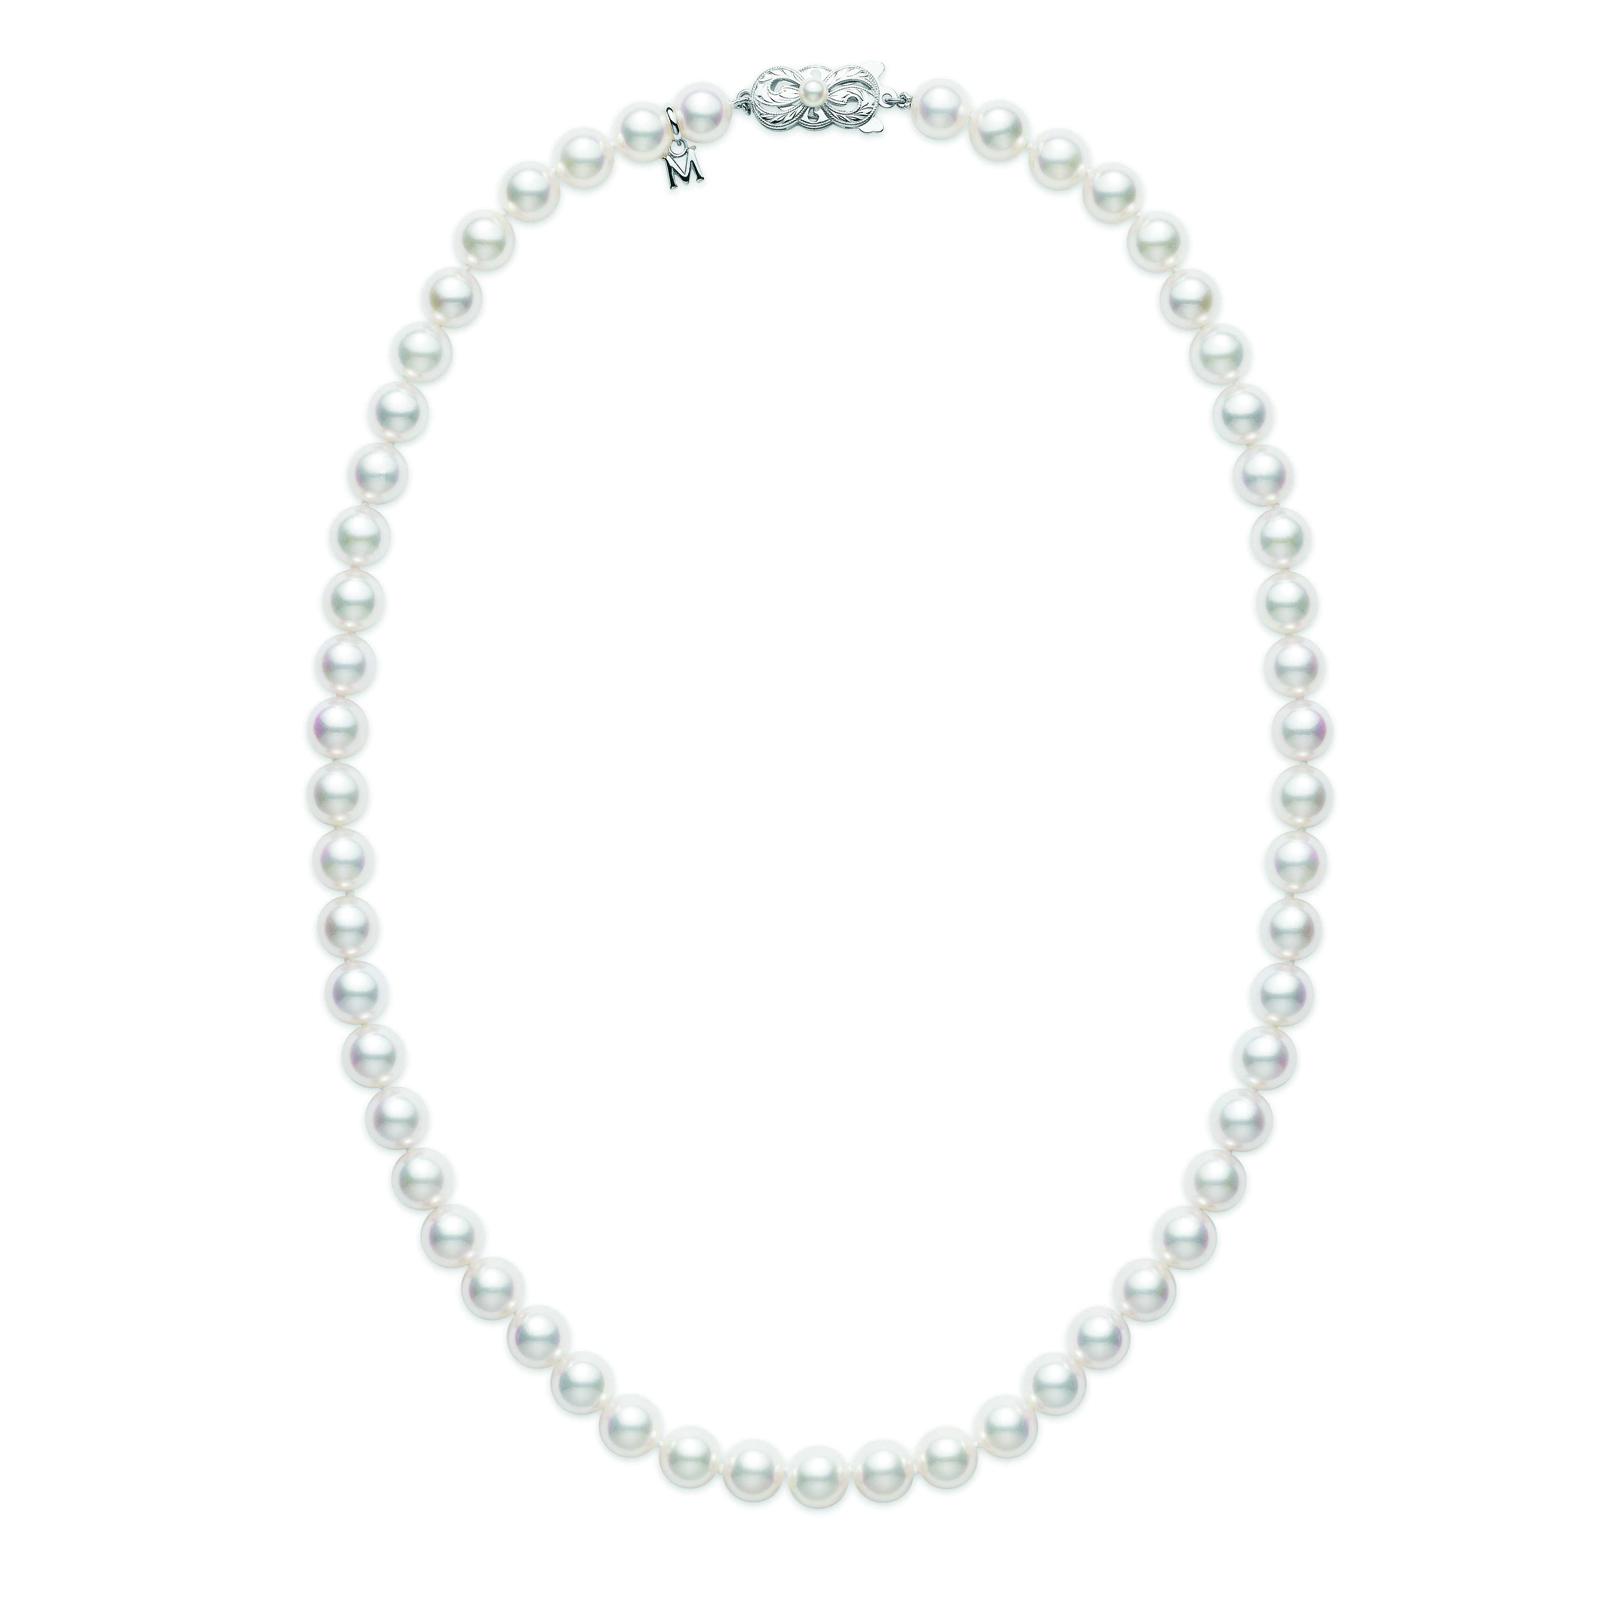 Mikimoto Princess Length Pearl Strand Necklace, 18 inches 0